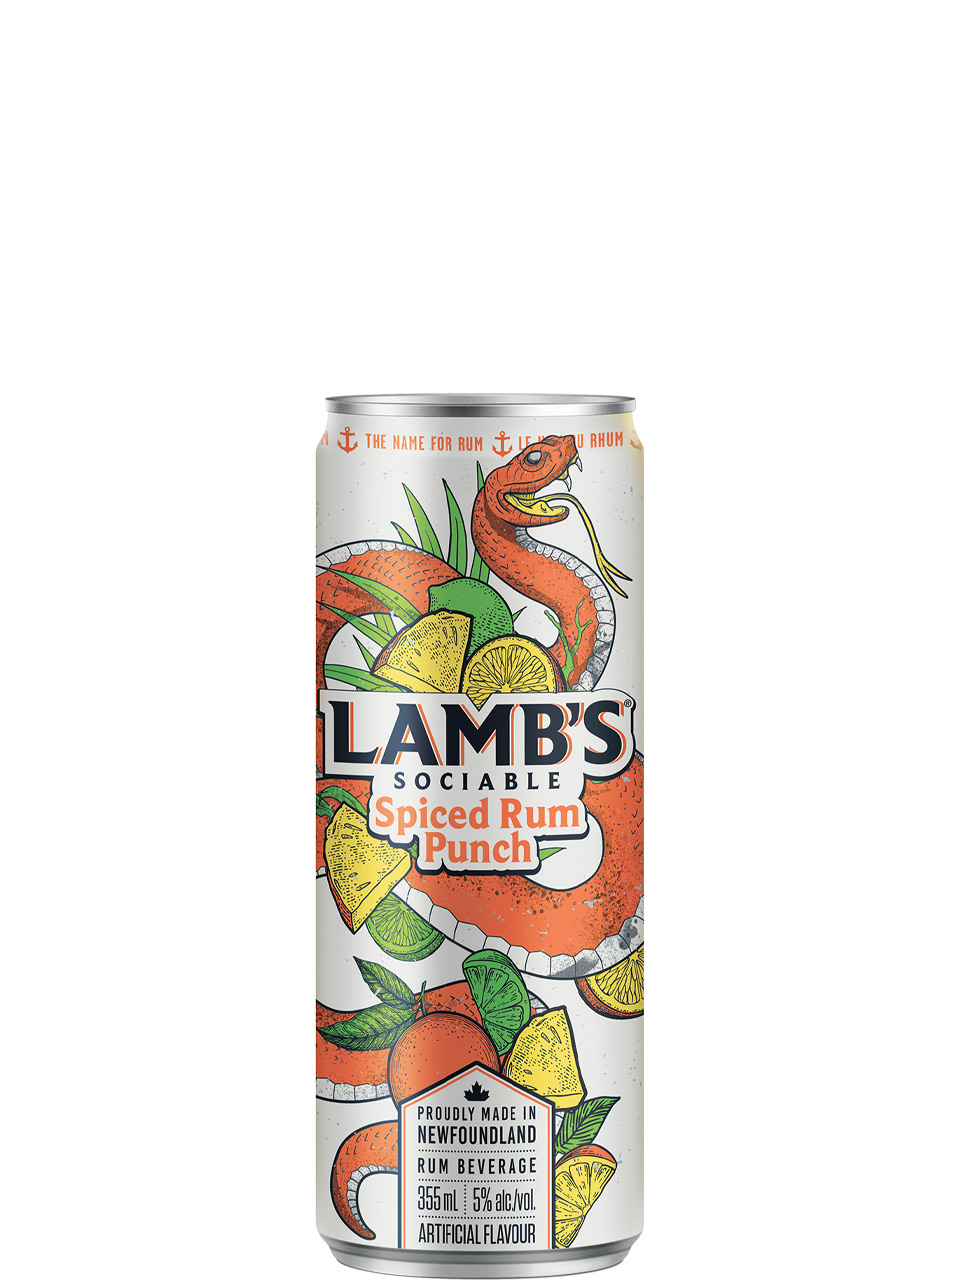 Lamb's Sociable Spiced Rum Punch 6 Pack Cans